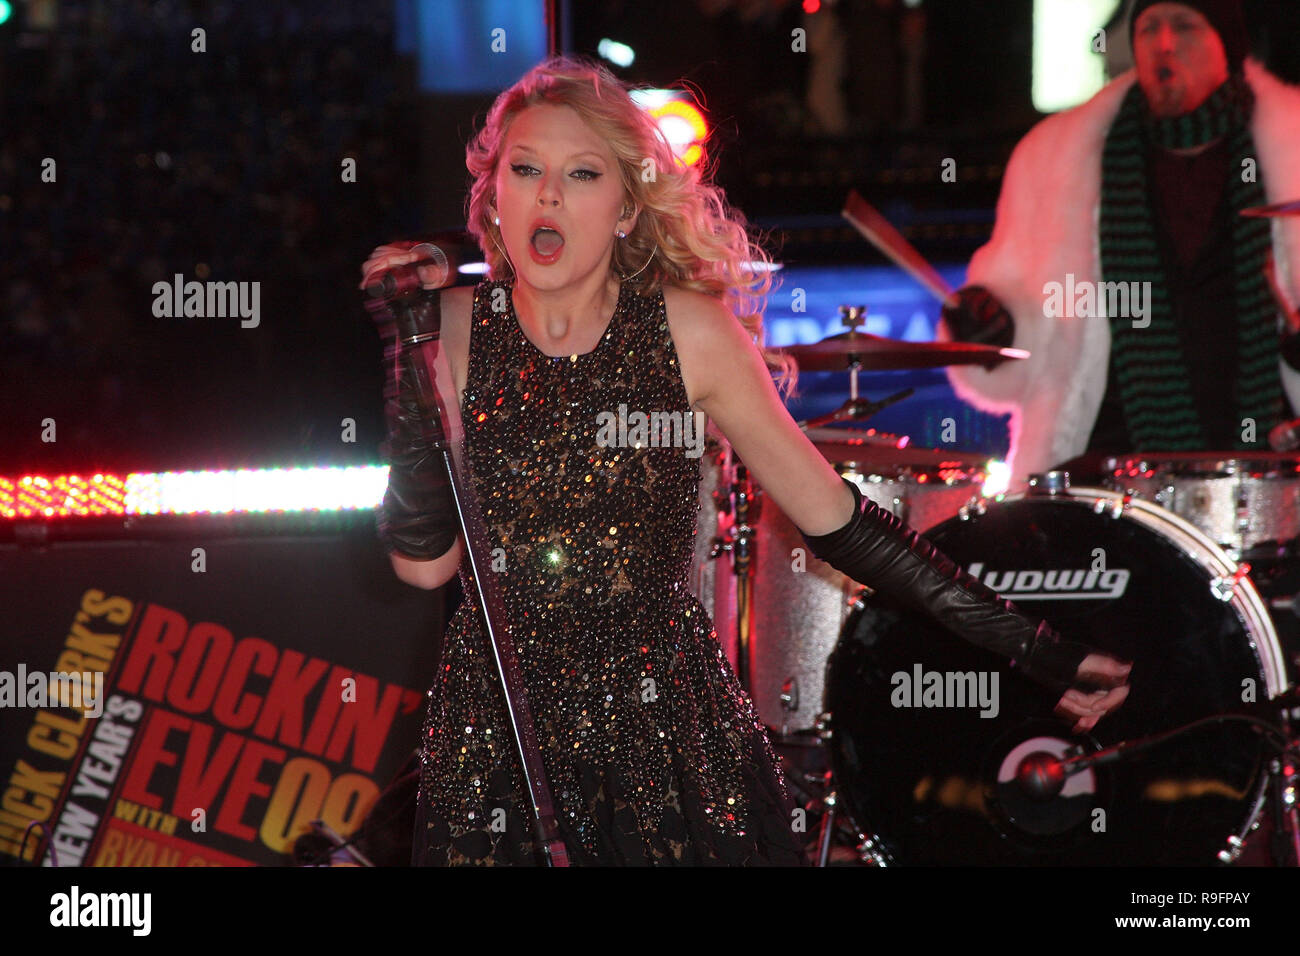 NEW YORK - DECEMBER 31:  Taylor Swift performs on stage at the ceremony to lower the New Years Eve ball in Times Square on December 31, 2008 in New York City.  (Photo by Steve Mack/S.D. Mack Pictures) Stock Photo